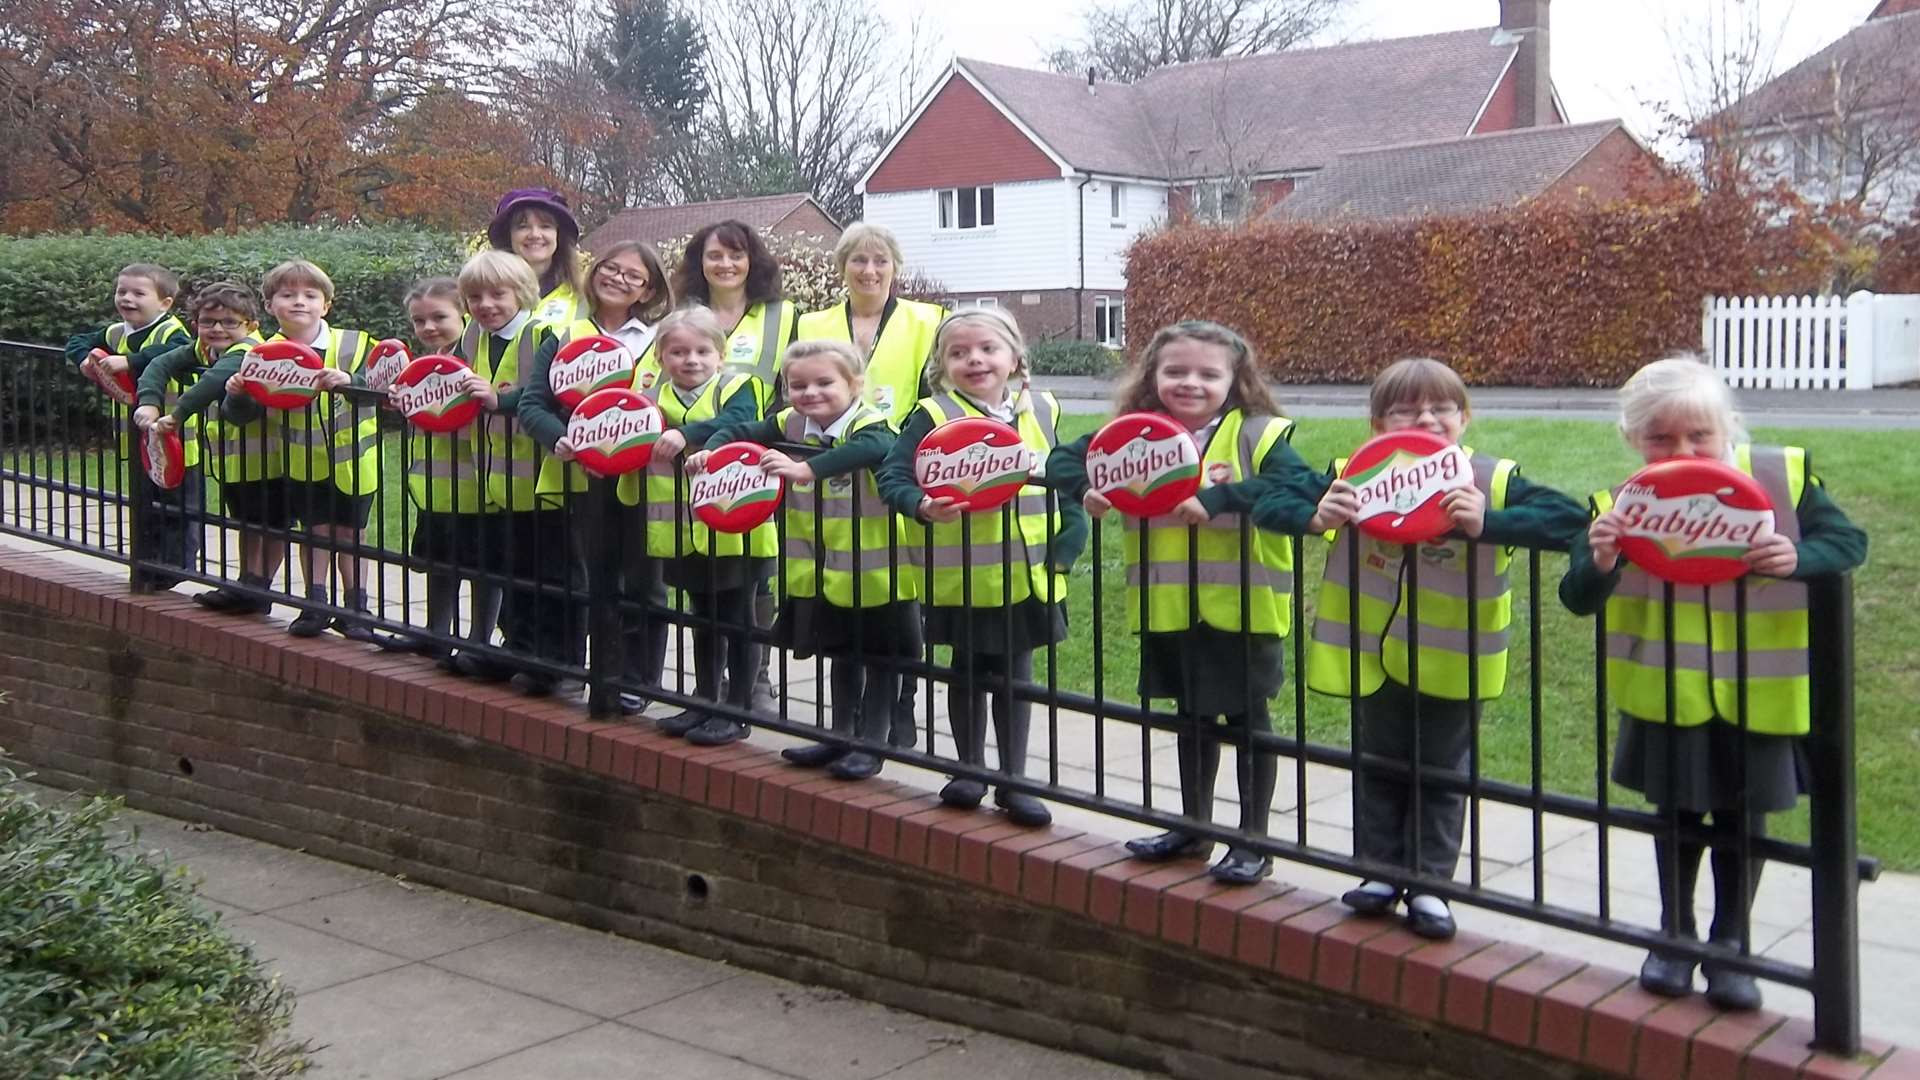 Whether using a walking bus (such as Goudhurst and Kilndown Primary, pictured) or walking with friends or family all primary school children in Kent, Medway and Bexley can enter the 'I Spy' writing competition organised by the KM Charity Team and Whitefriars.